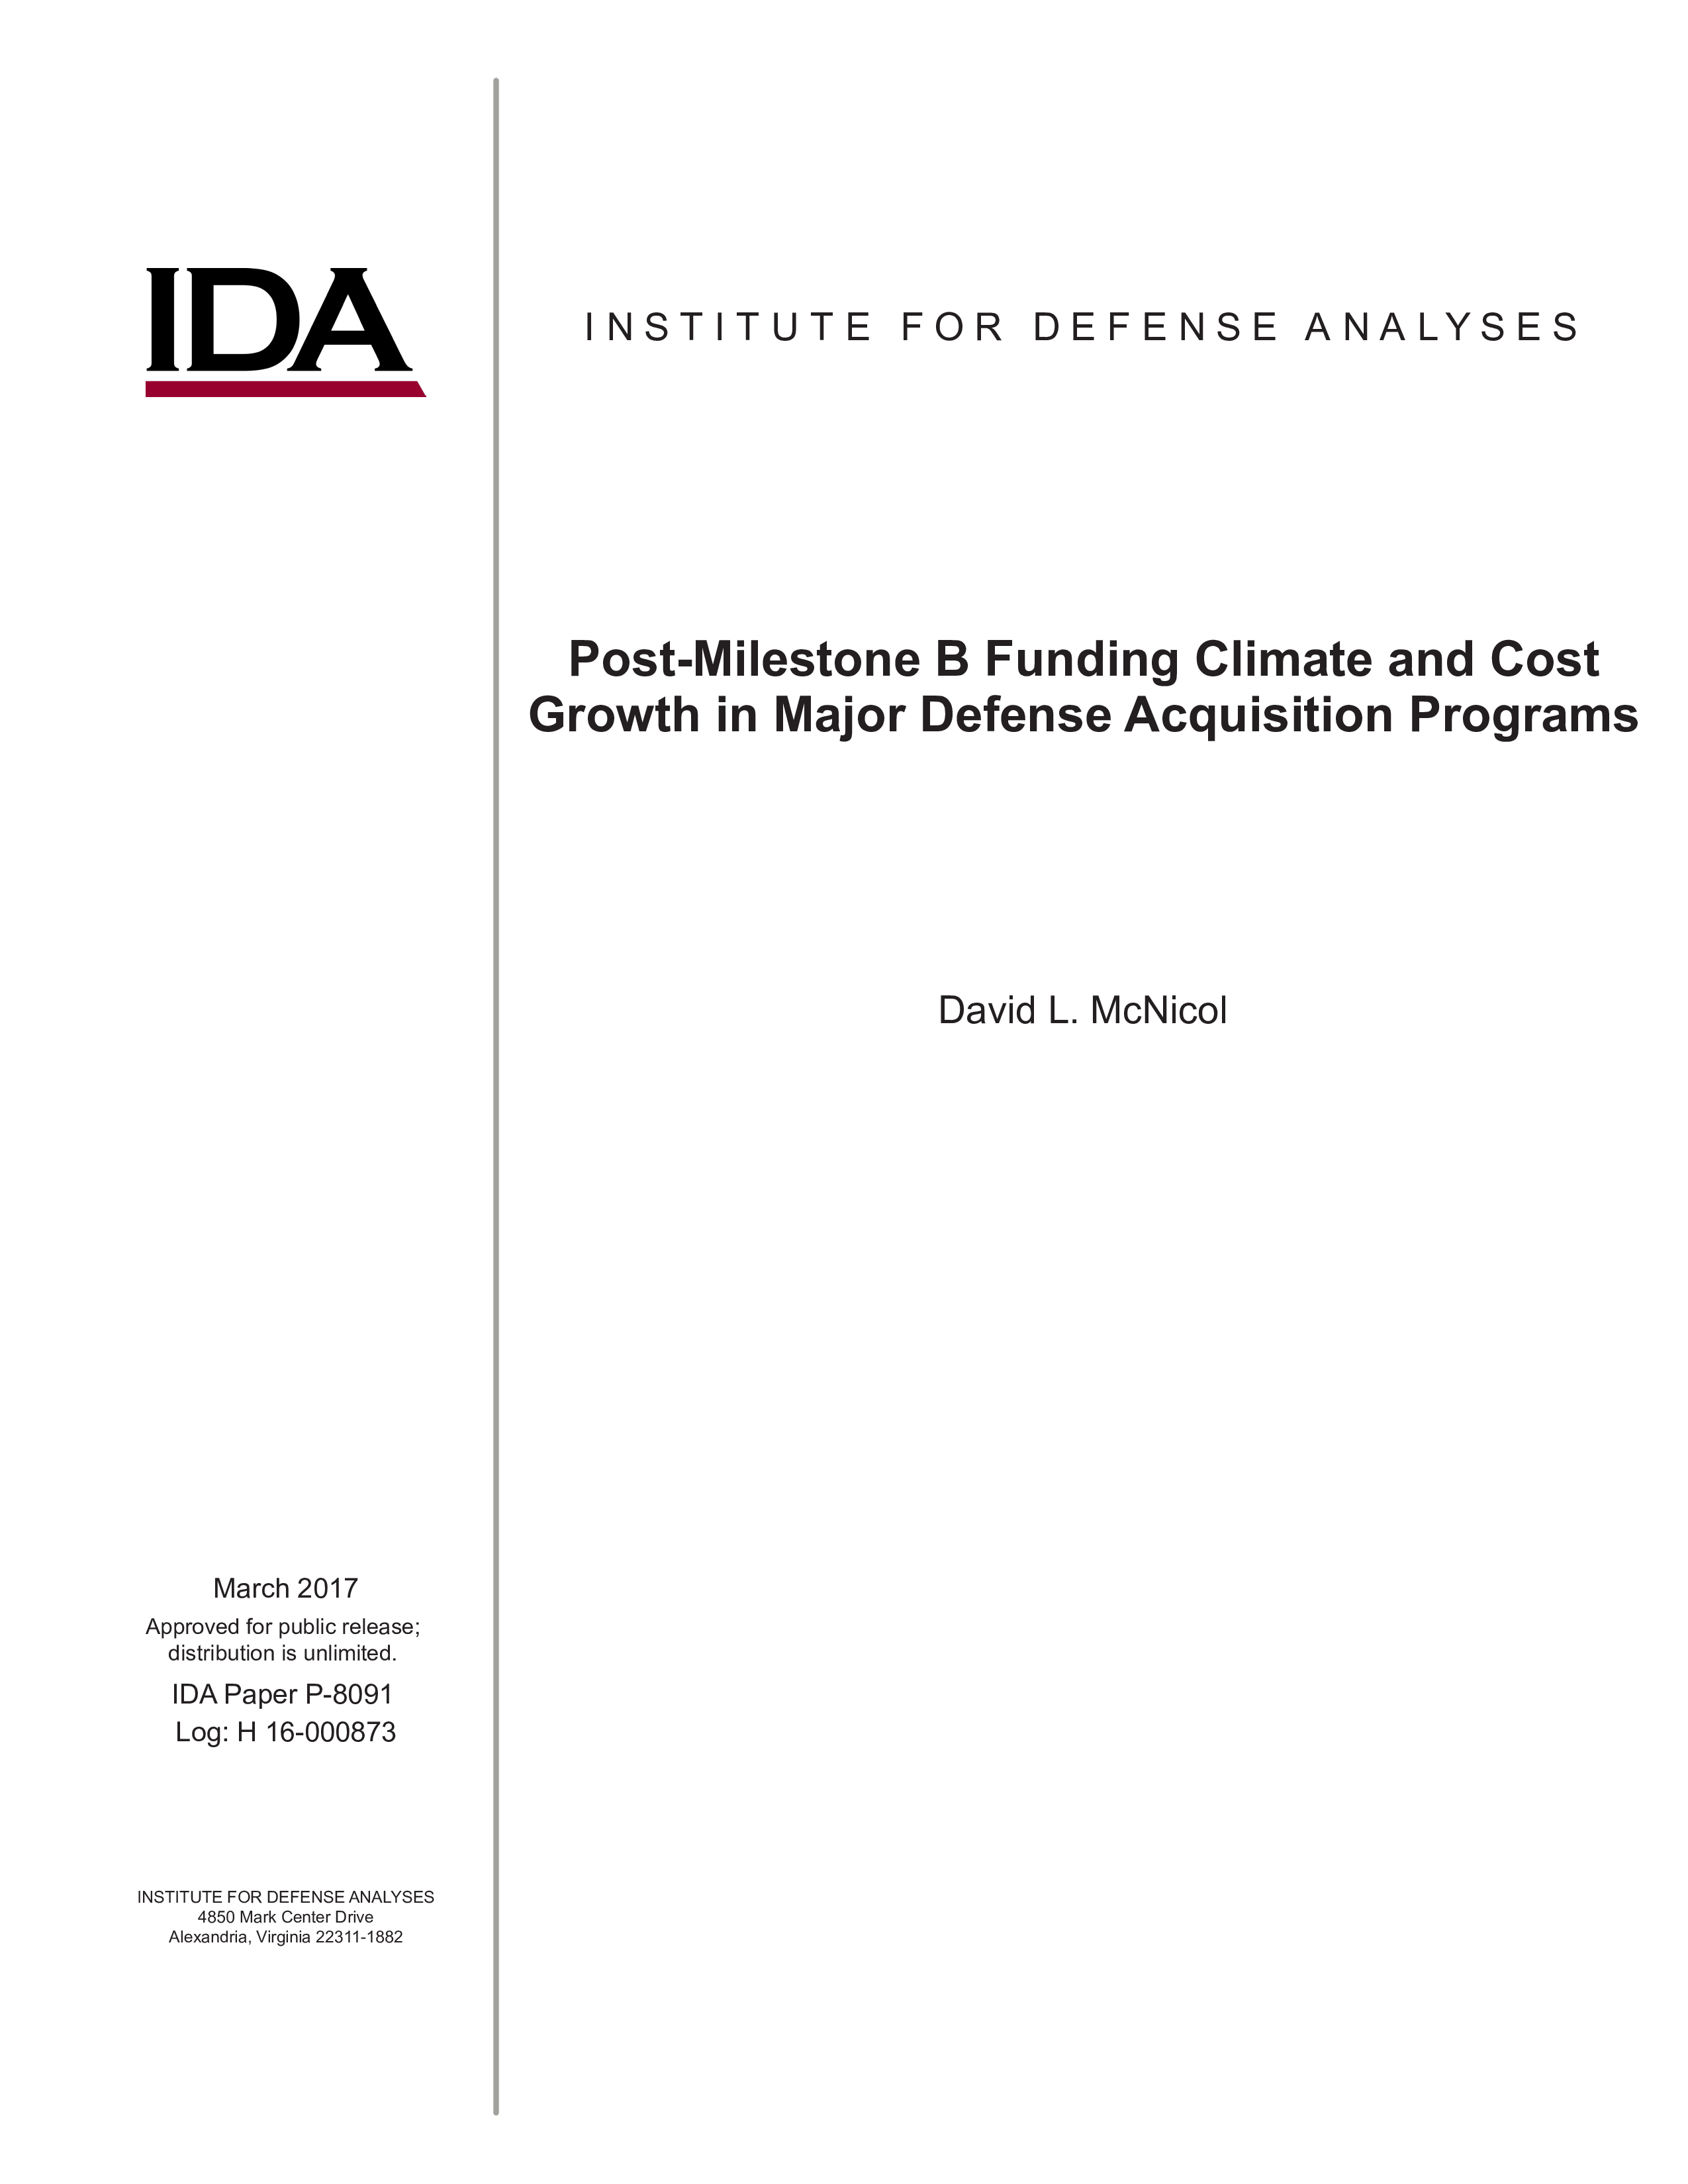 Post-Milestone B Funding Climate and Cost Growth in Major Defense Acquisition Programs